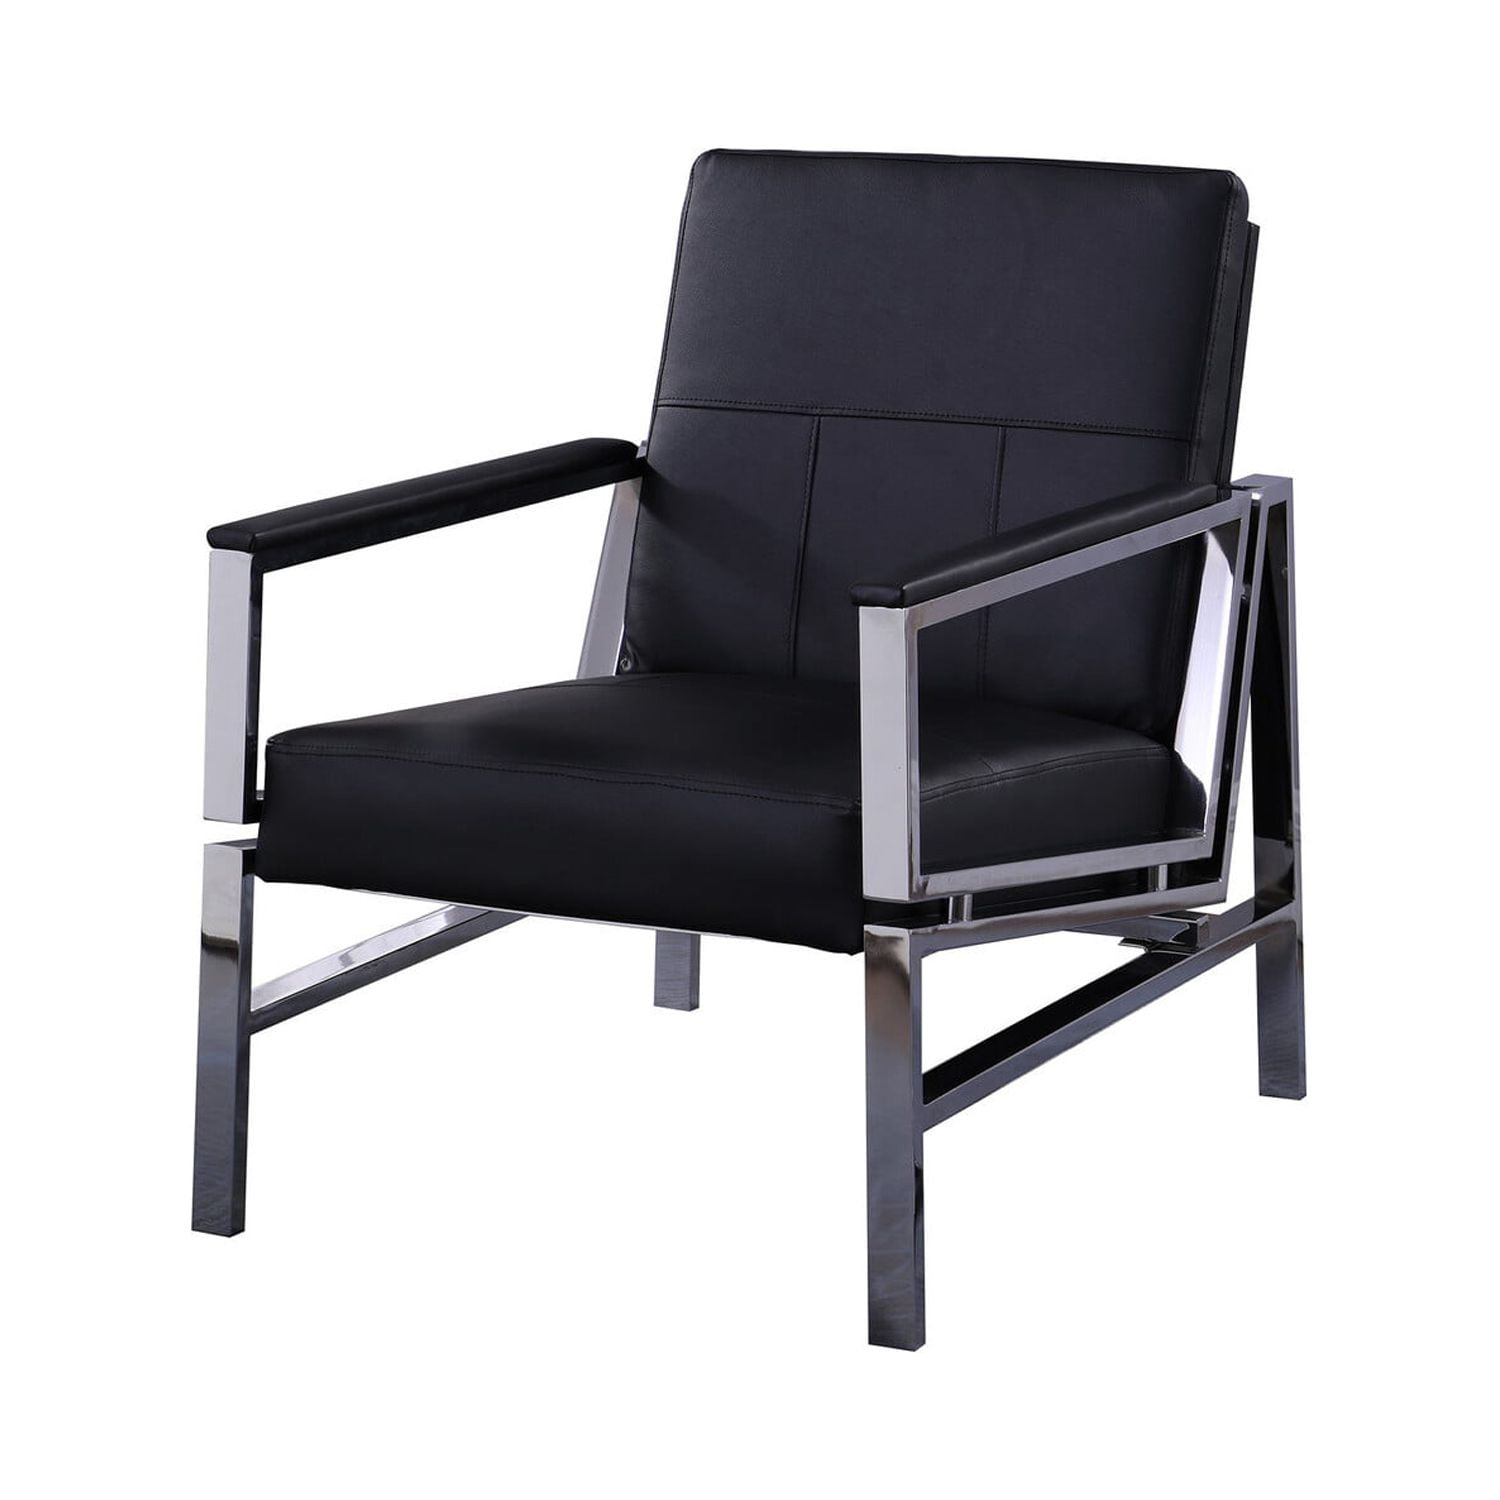 Hl2937 Black Leather & Stainless Steel Accent Chair, Black